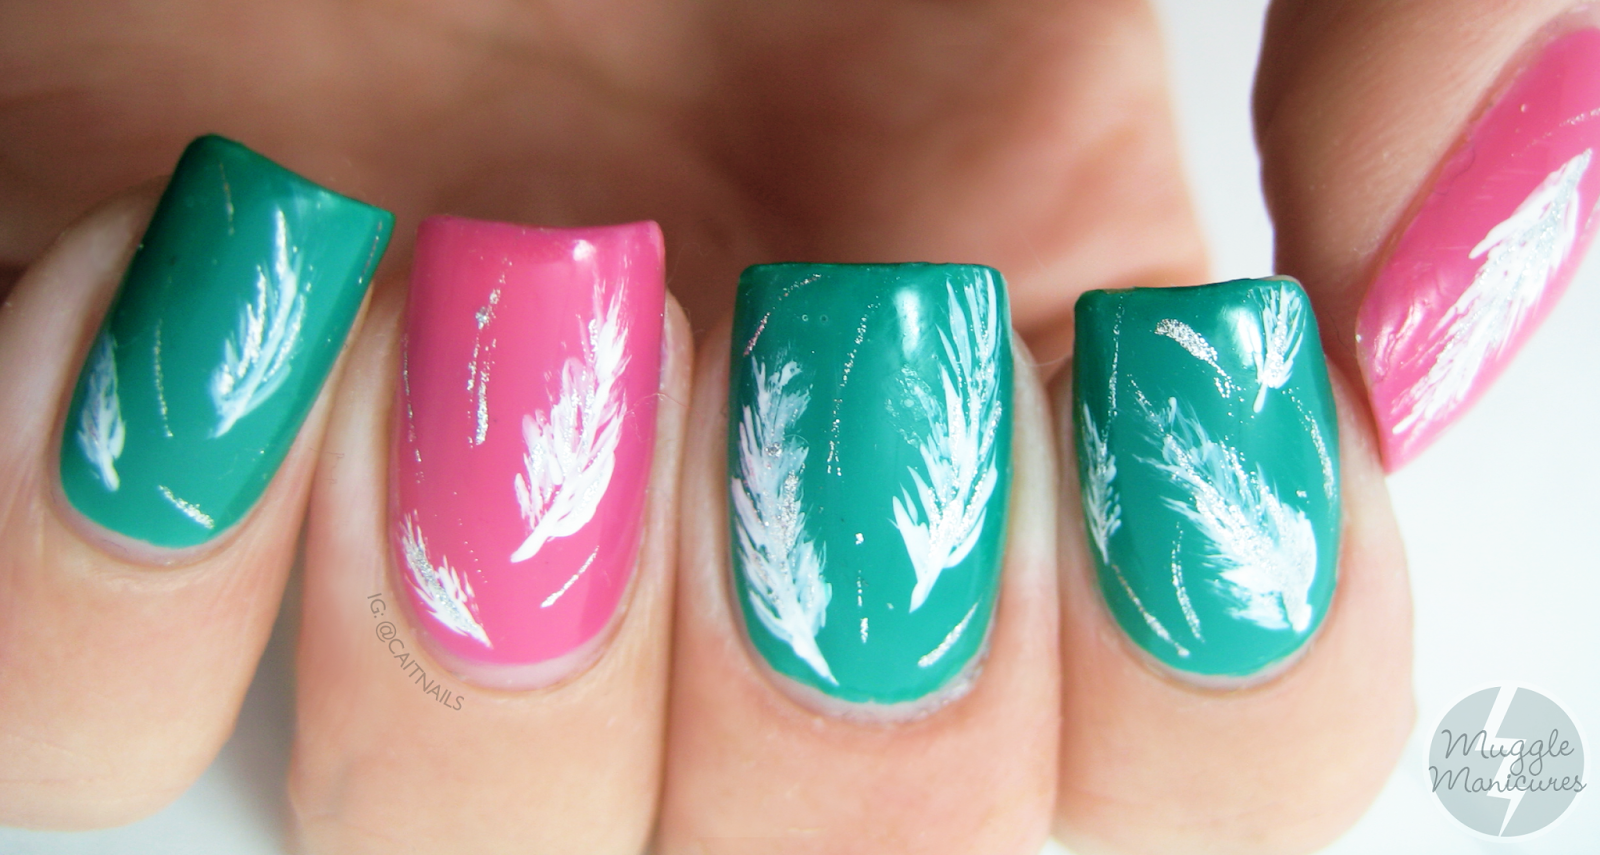 Feather Nail Art Designs: 10 Beautiful Ideas to Try - wide 6